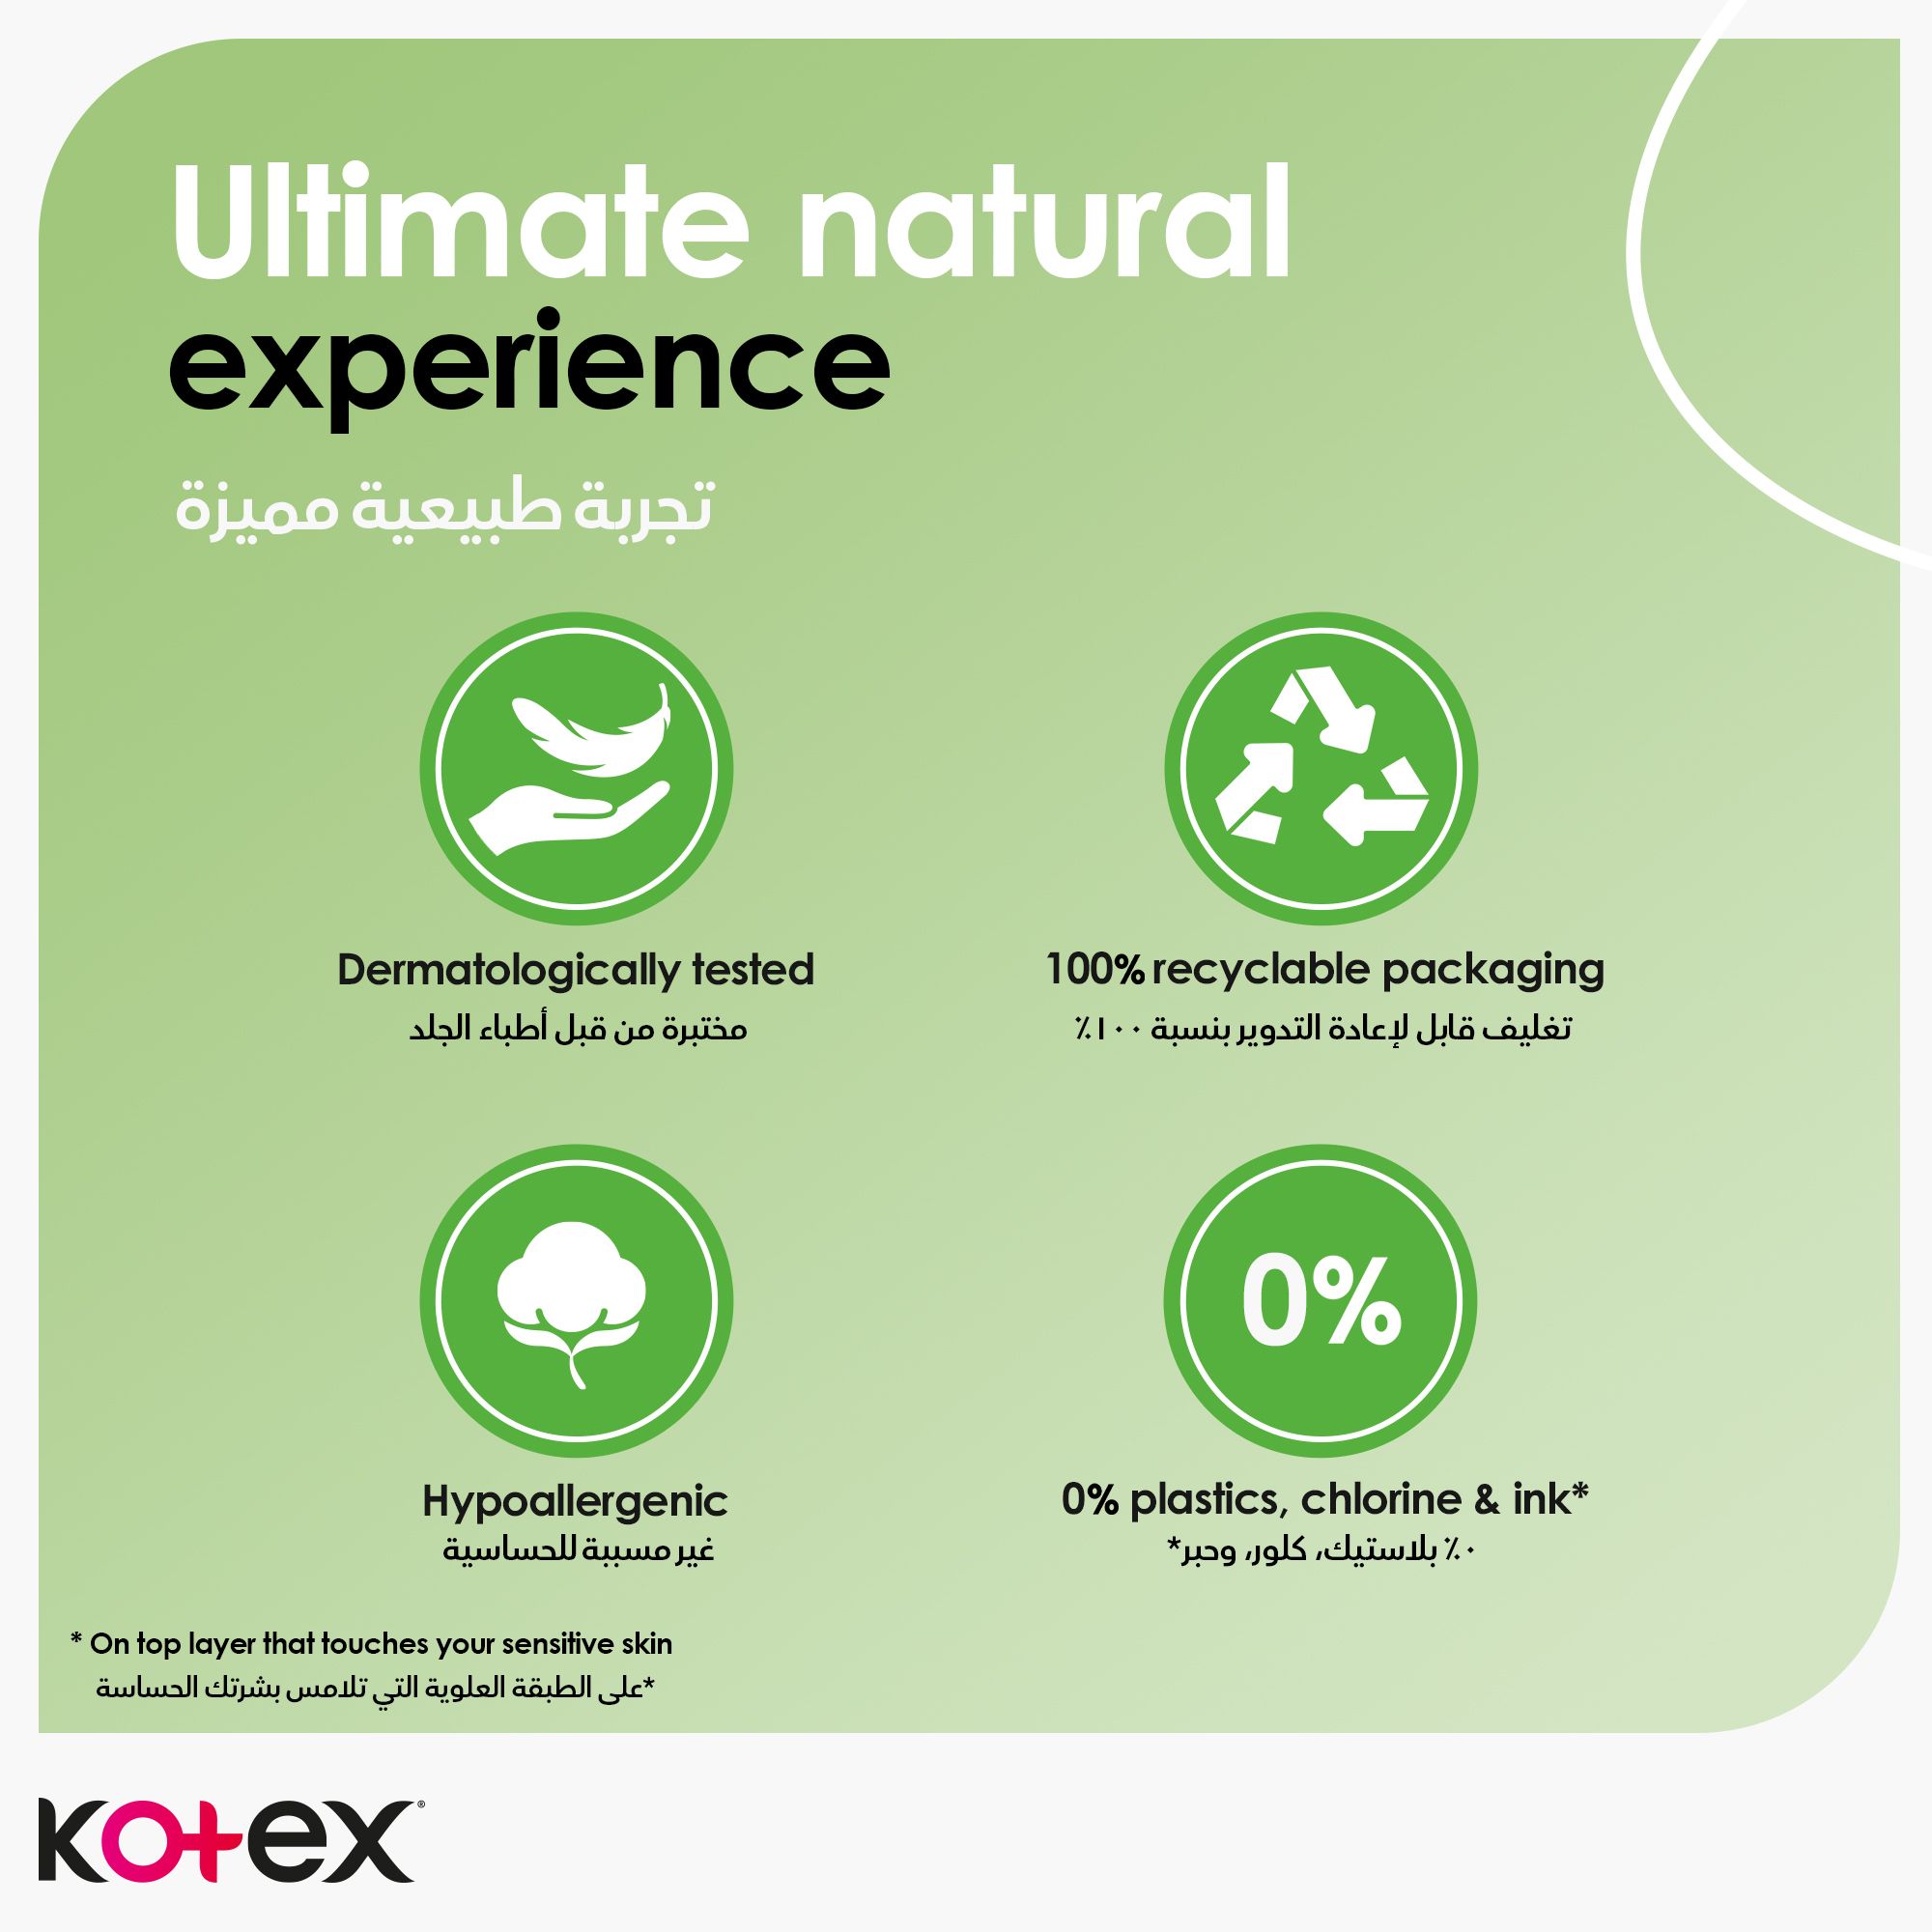 Kotex Natural Maxi Protect Thick Pads, 100% Cotton Pad, Super Size with Wings, 26 Sanitary Pads